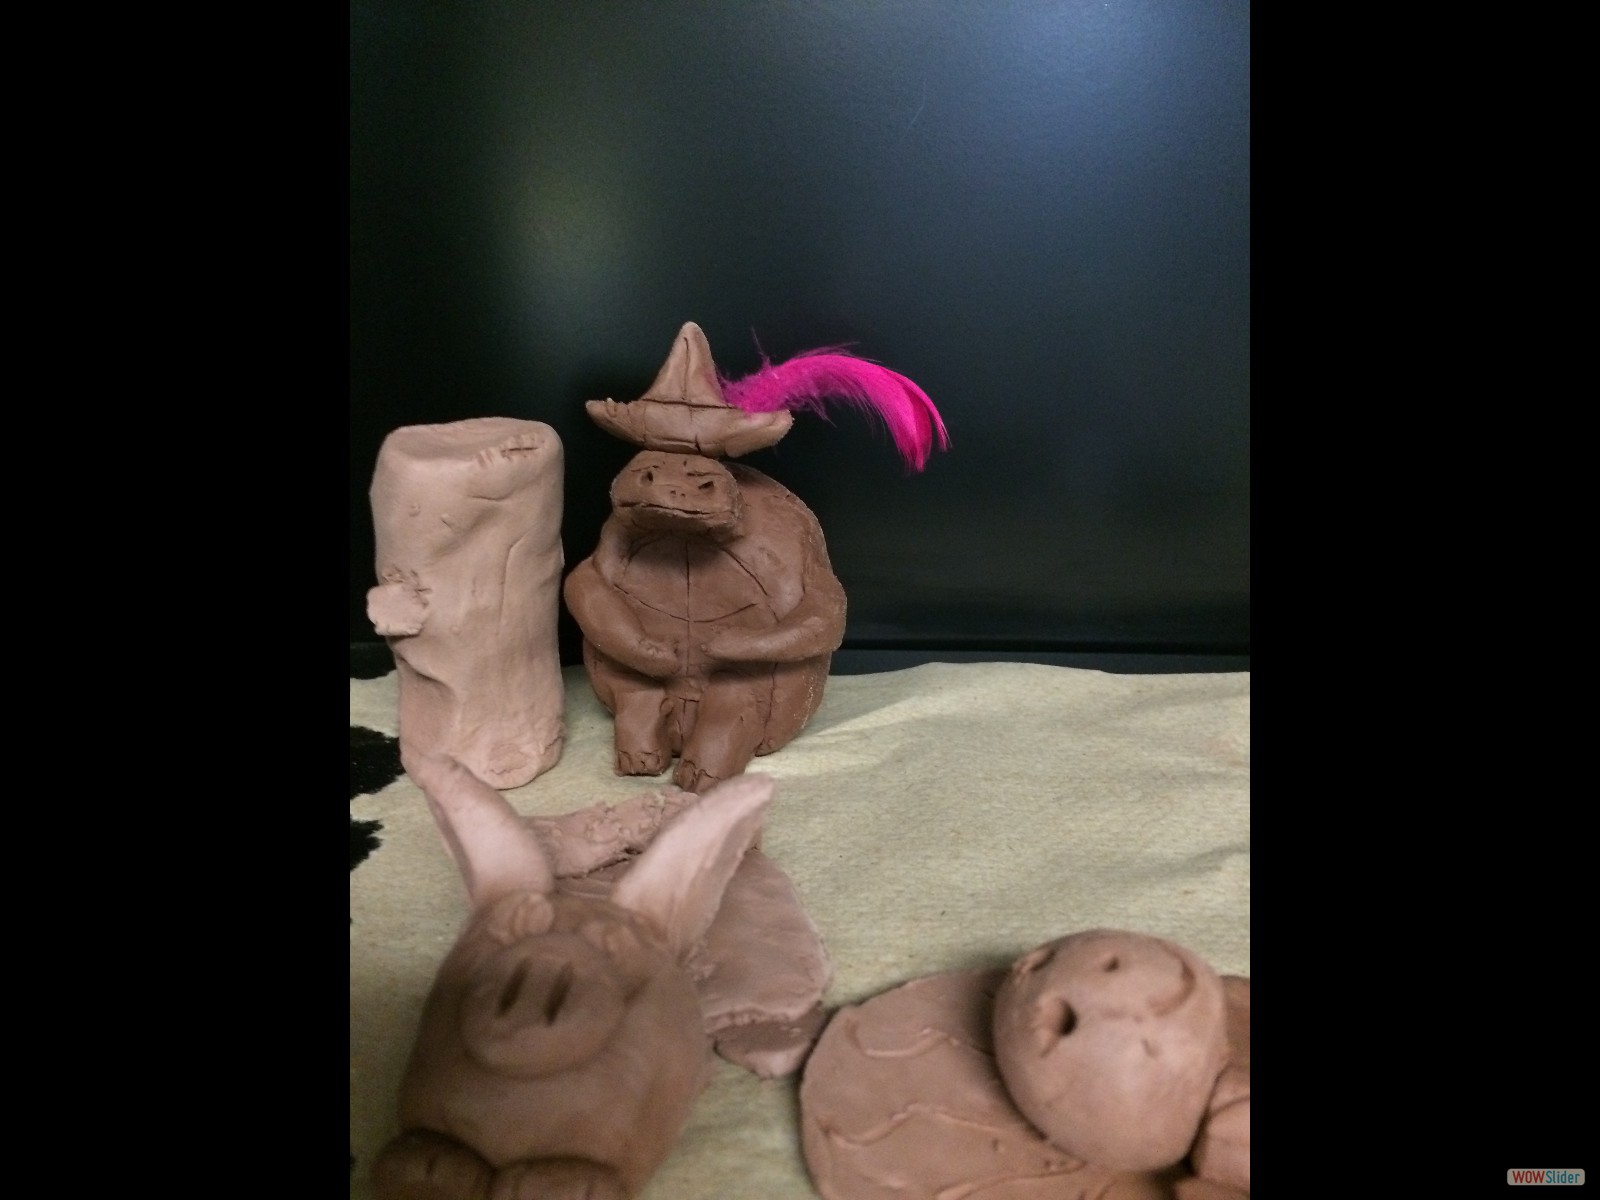 Center for Archaeological Research campers sculpted clay gods inspired by Mesoamerica, like this one influenced by images of turtles in Maya art.